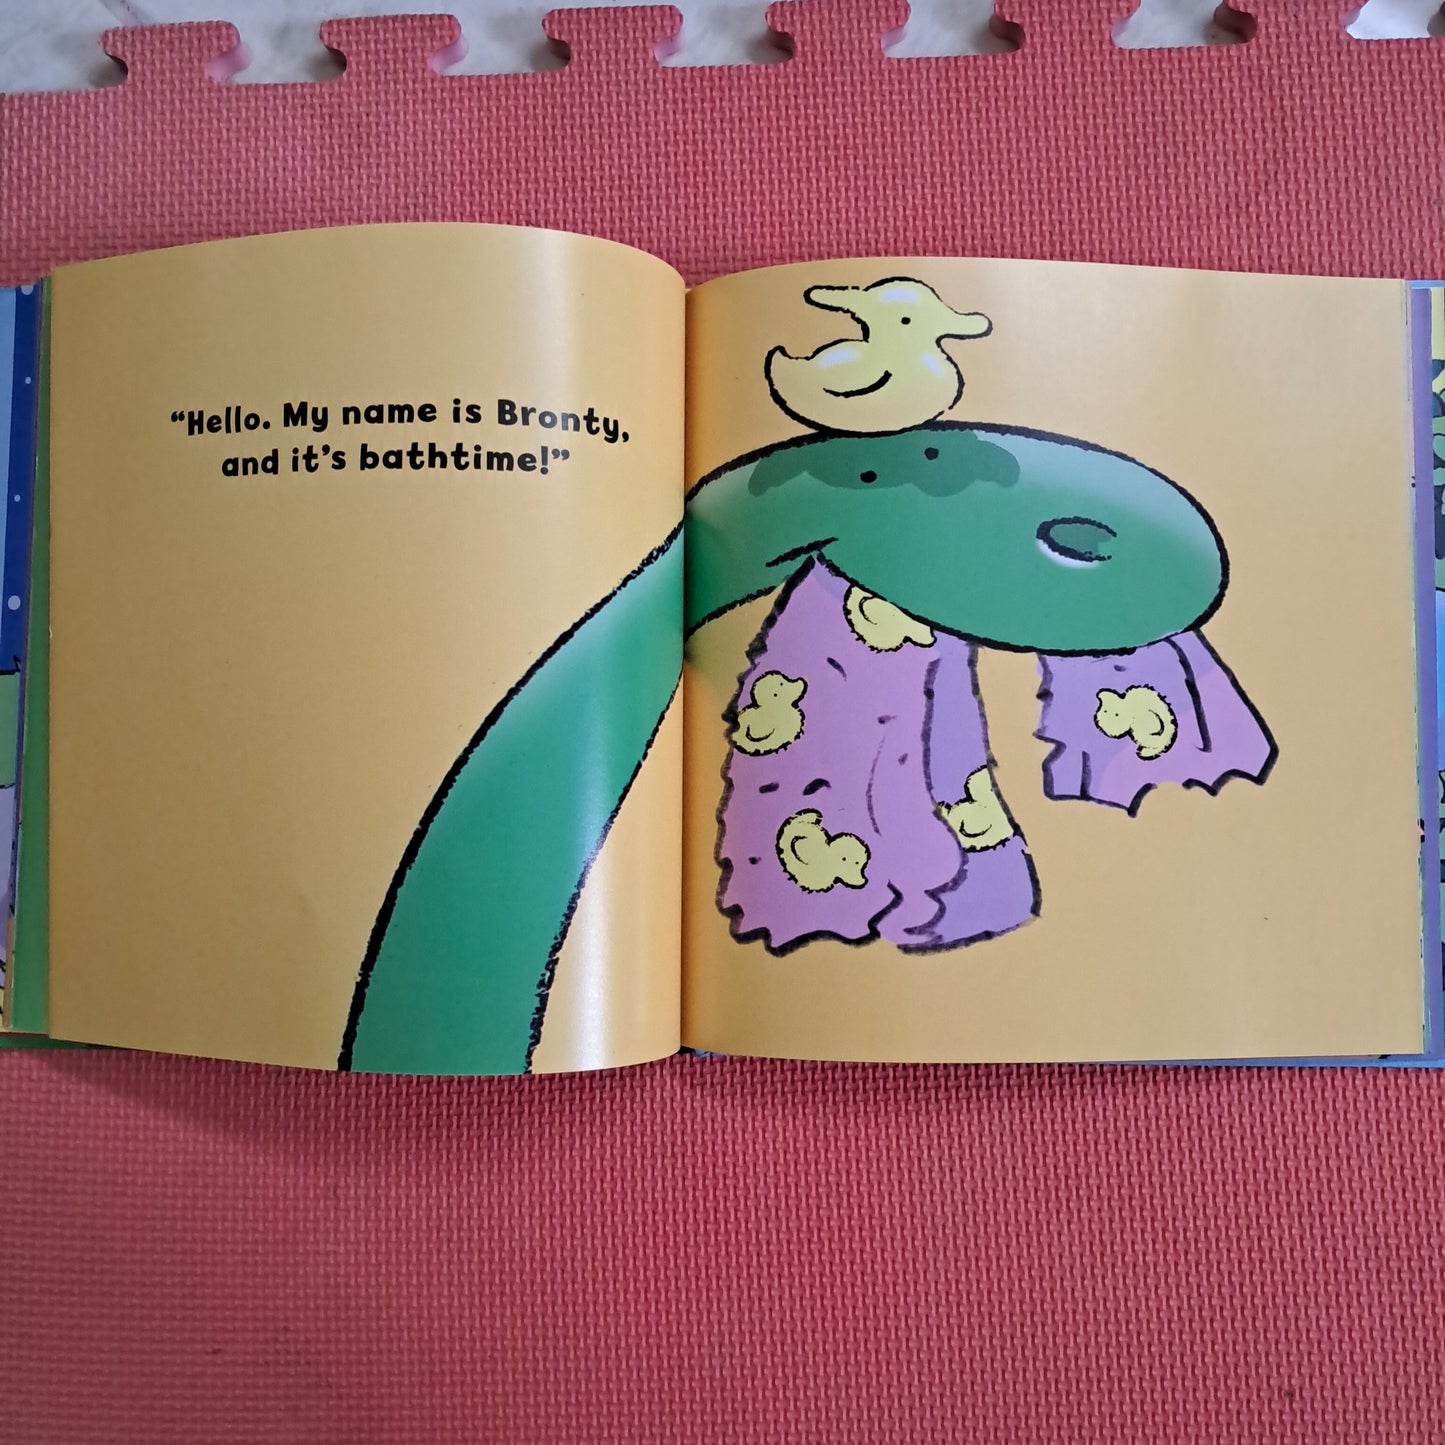 Toddlersaurus lift the flap book